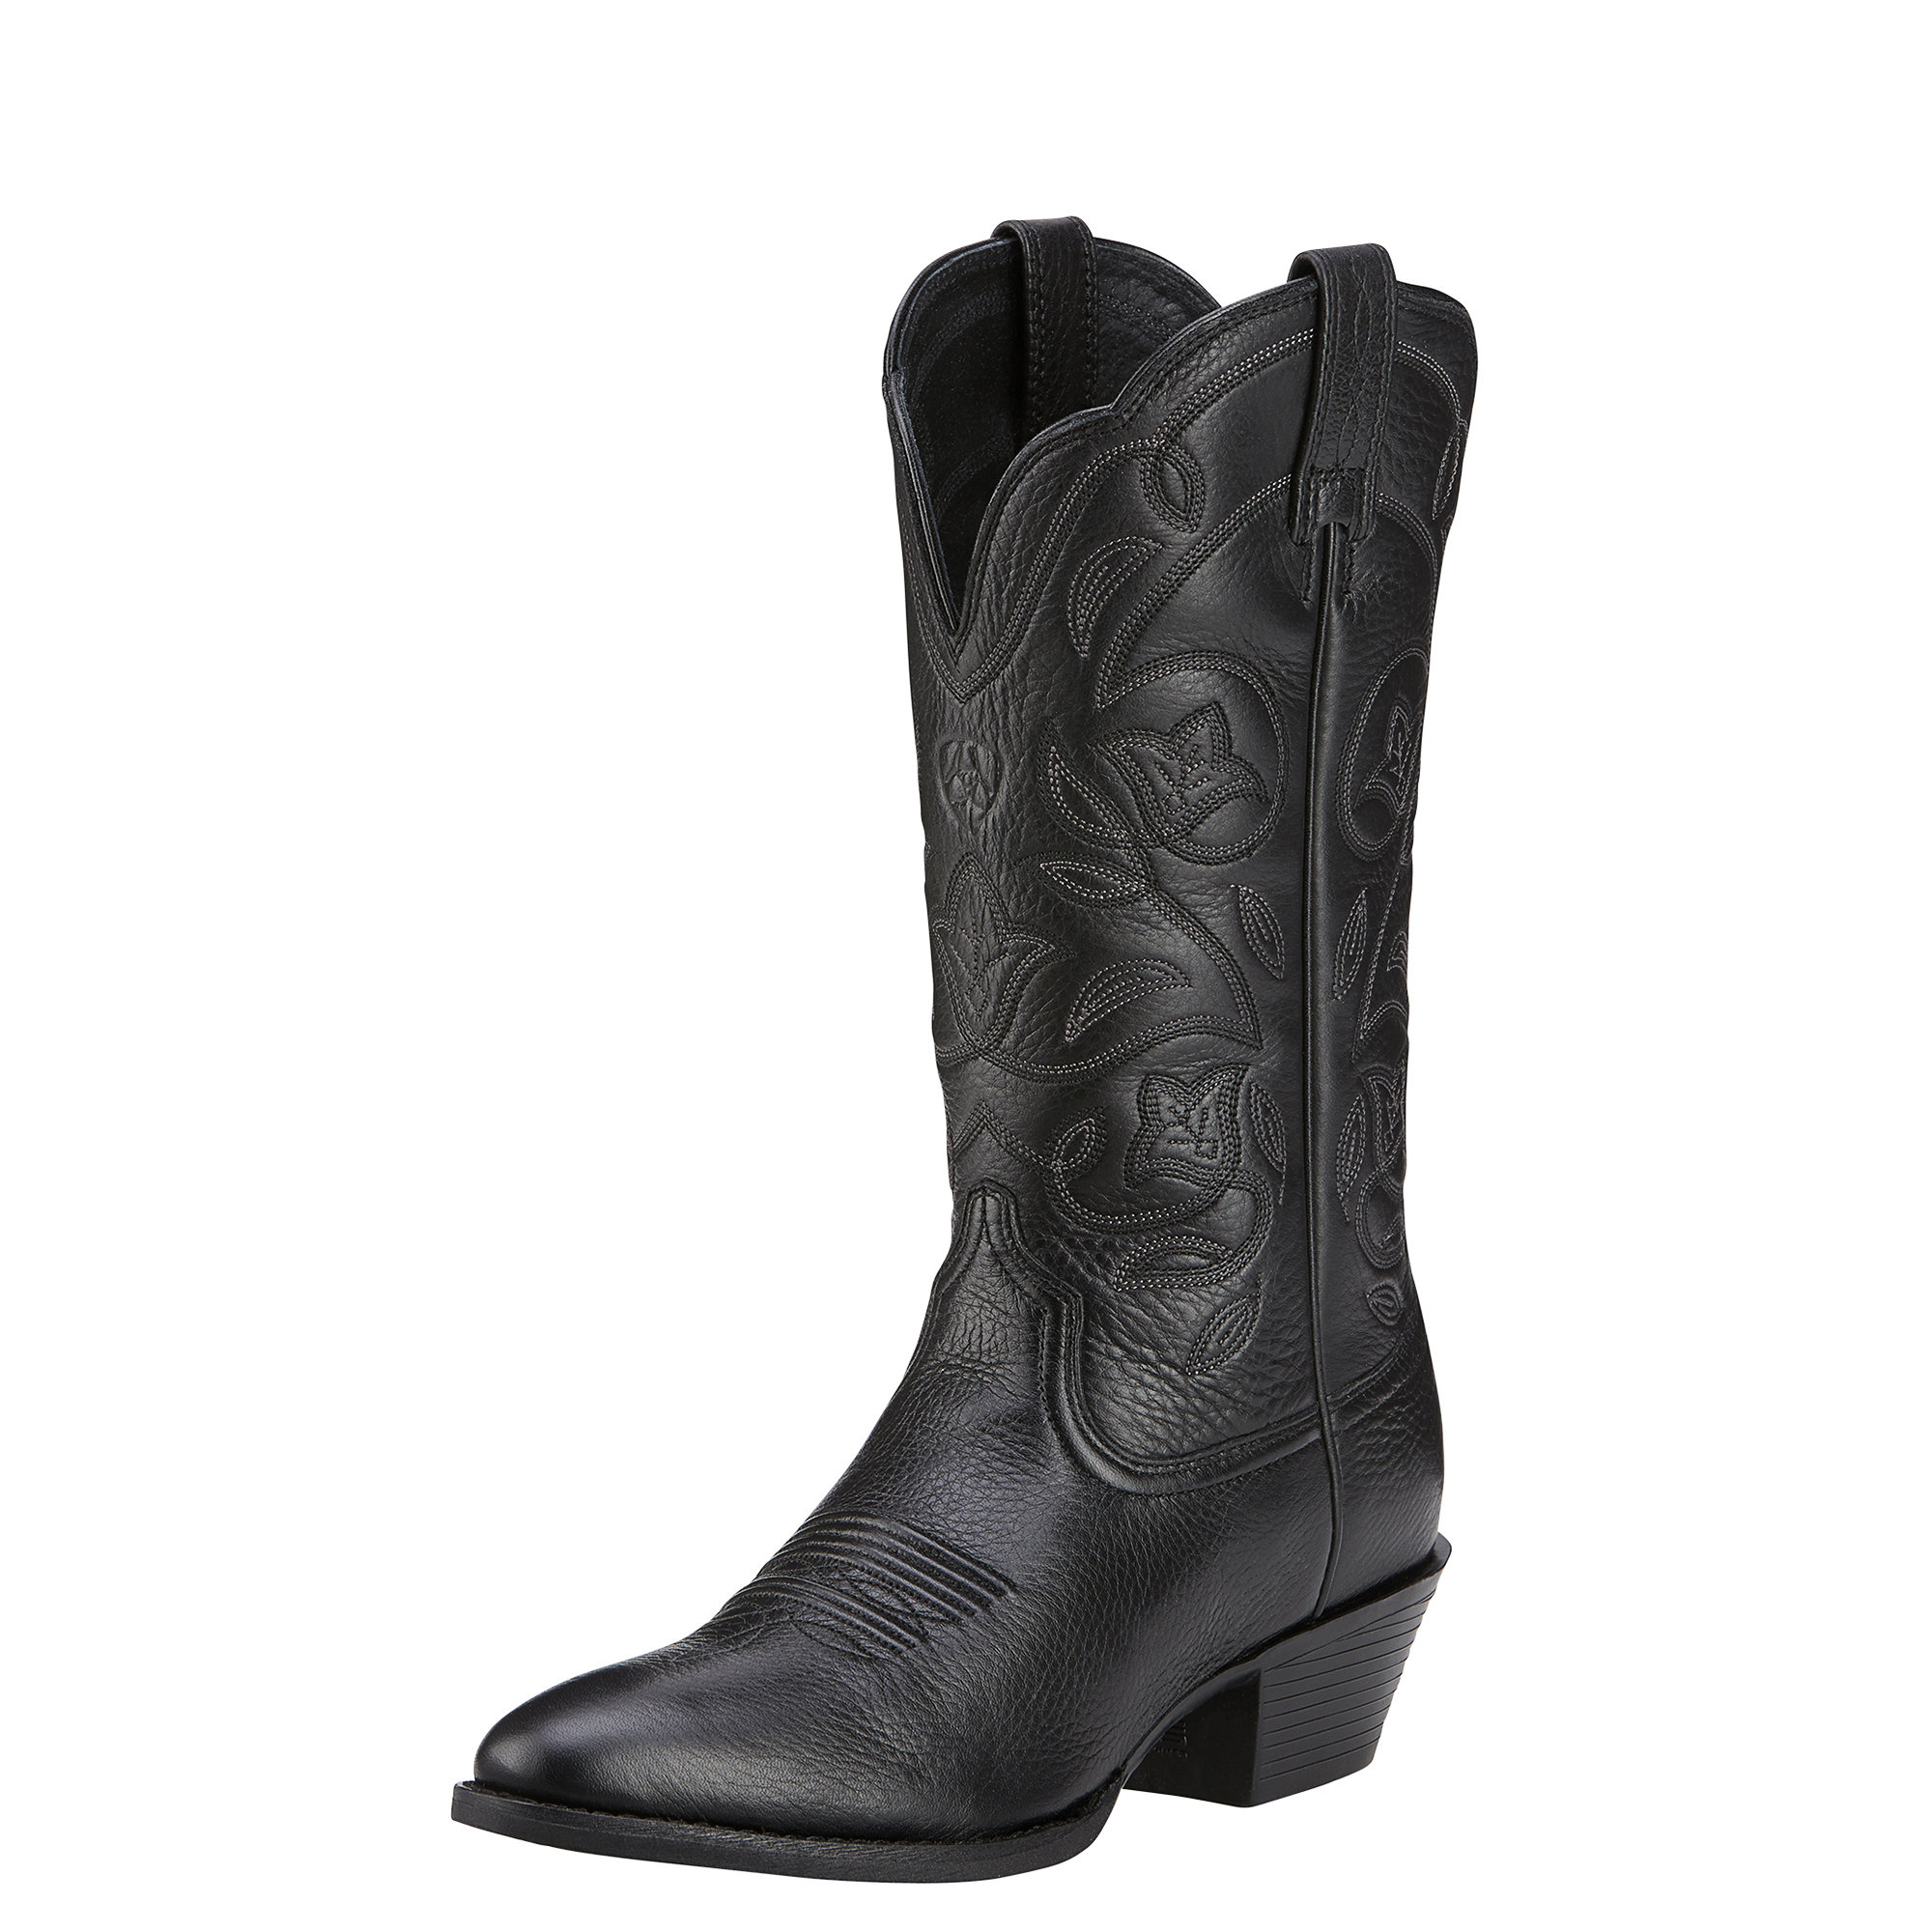 Ariat_Heritage_R_Toe_Western_Boot_10001037_3-4_front